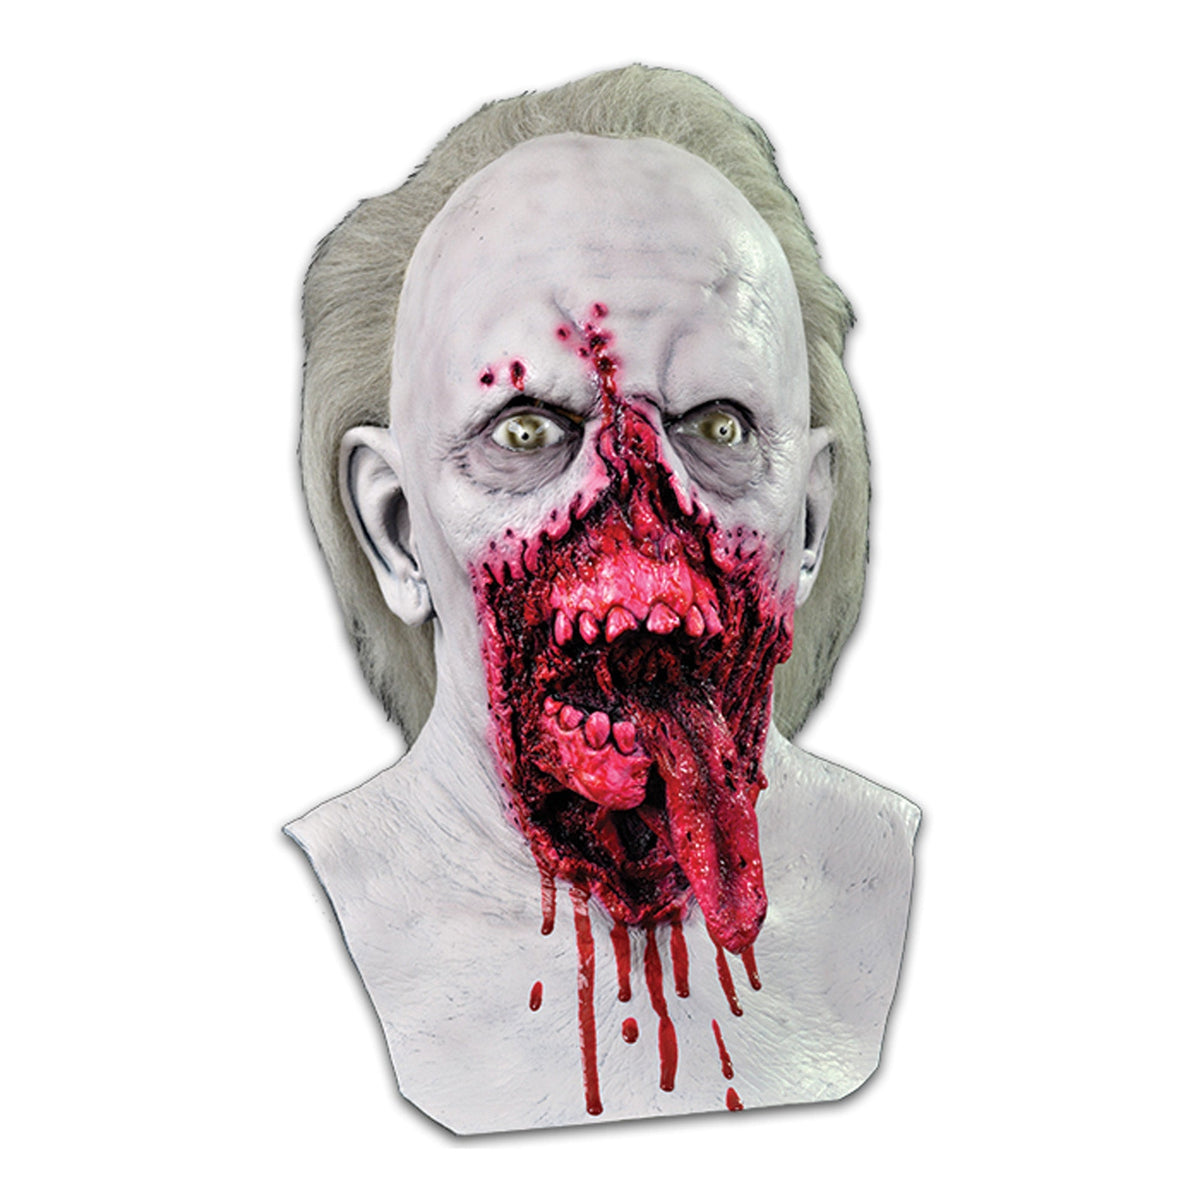 TRICK OR TREAT STUDIOS INC Costume Accessories Dr. Tongue Zombie Mask for Adults 854146005166